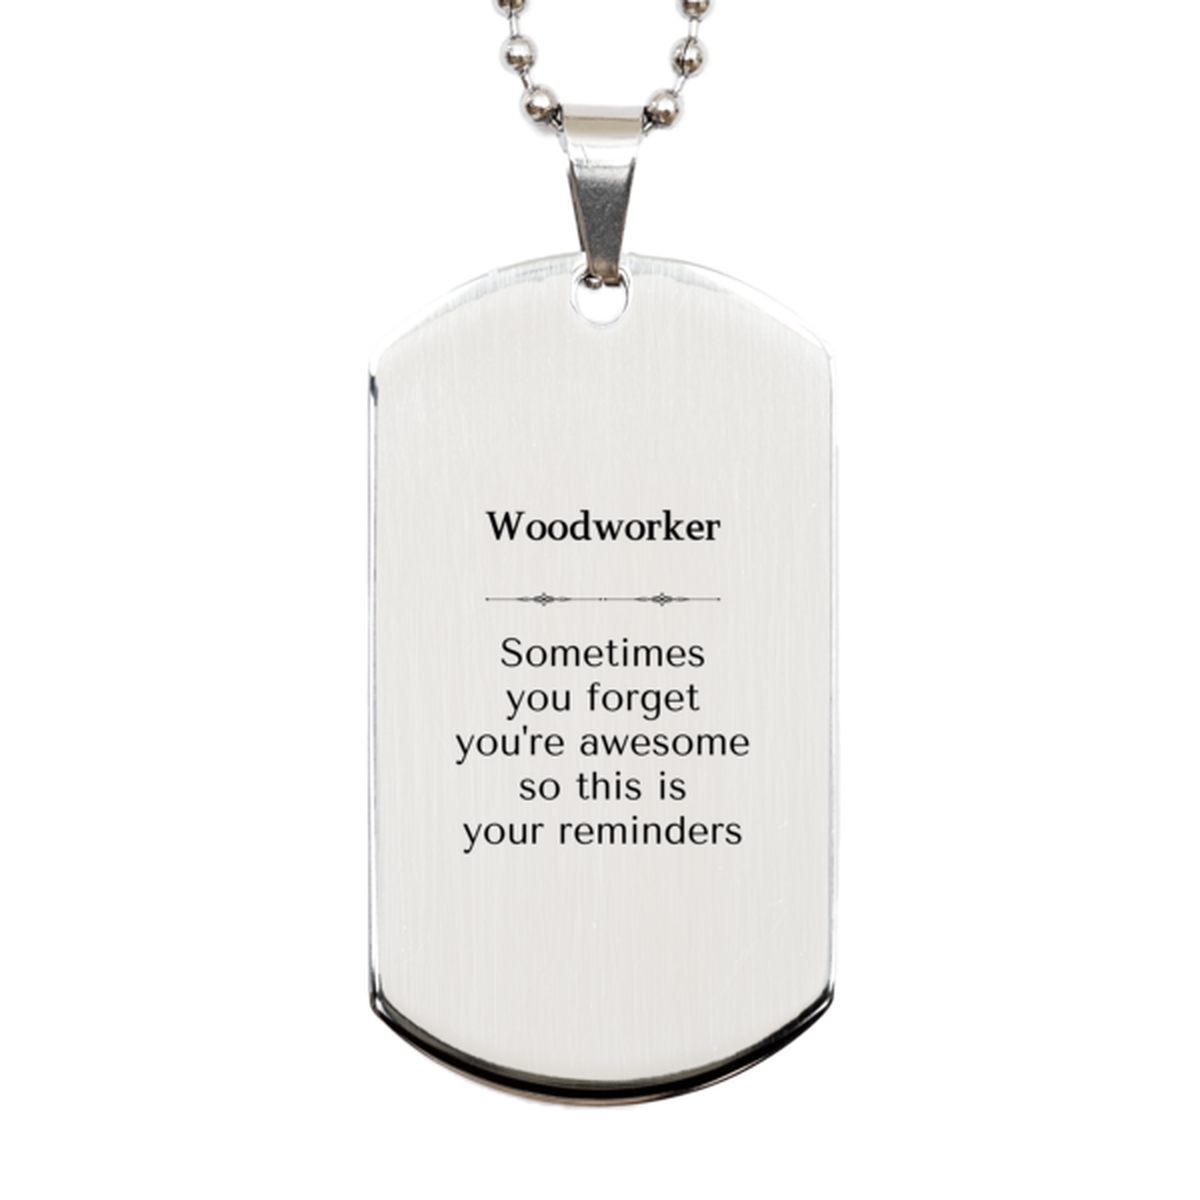 Sentimental Woodworker Silver Dog Tag, Woodworker Sometimes you forget you're awesome so this is your reminders, Graduation Christmas Birthday Gifts for Woodworker, Men, Women, Coworkers